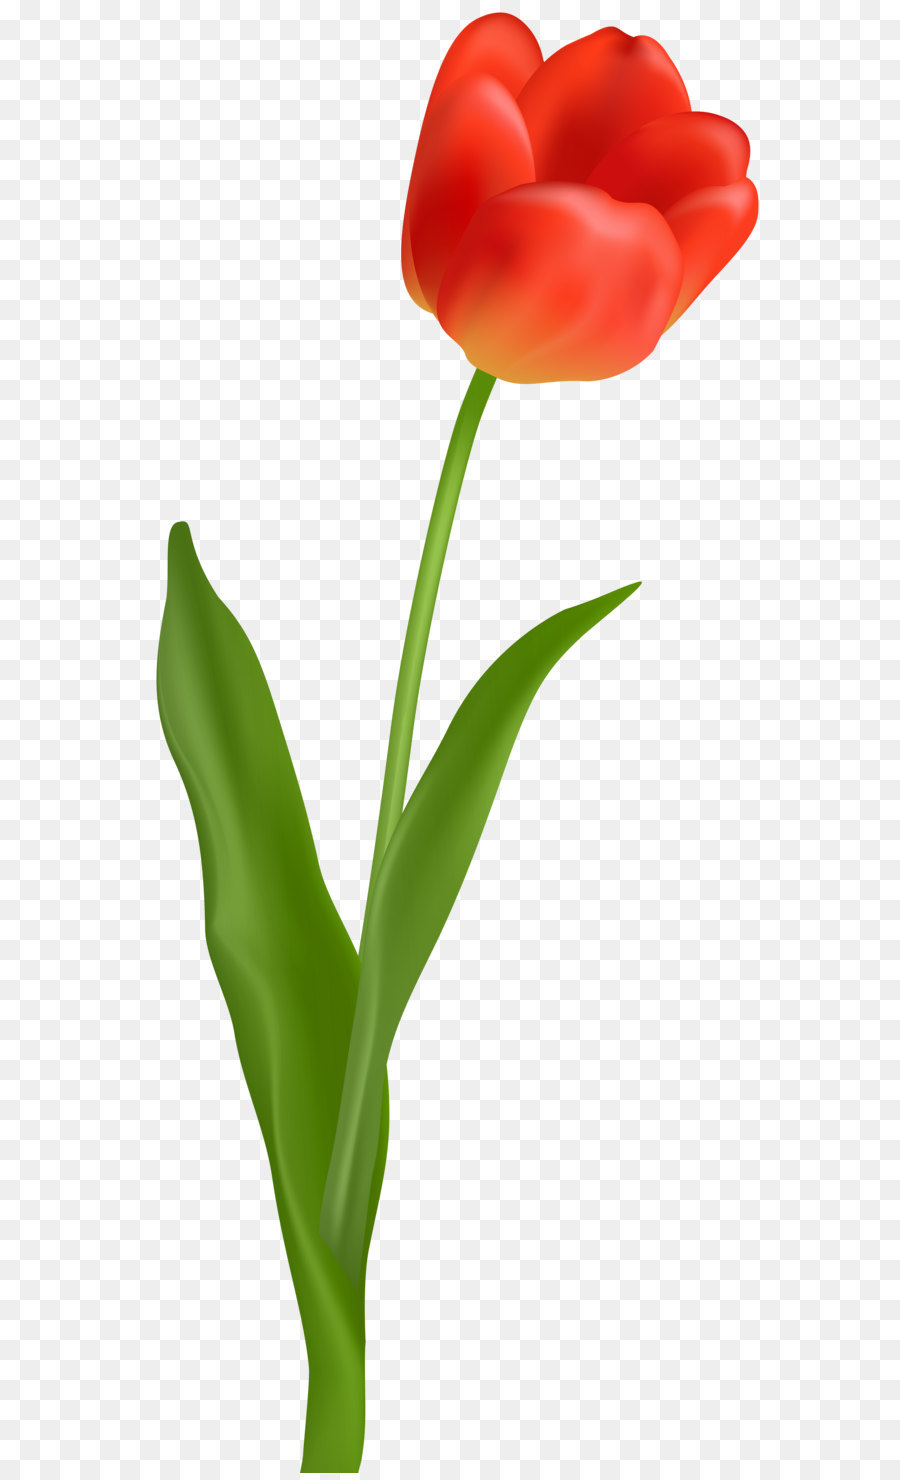 Tulip Clip art - Red tulips png download - 1000*1000 - Free Transparent ...